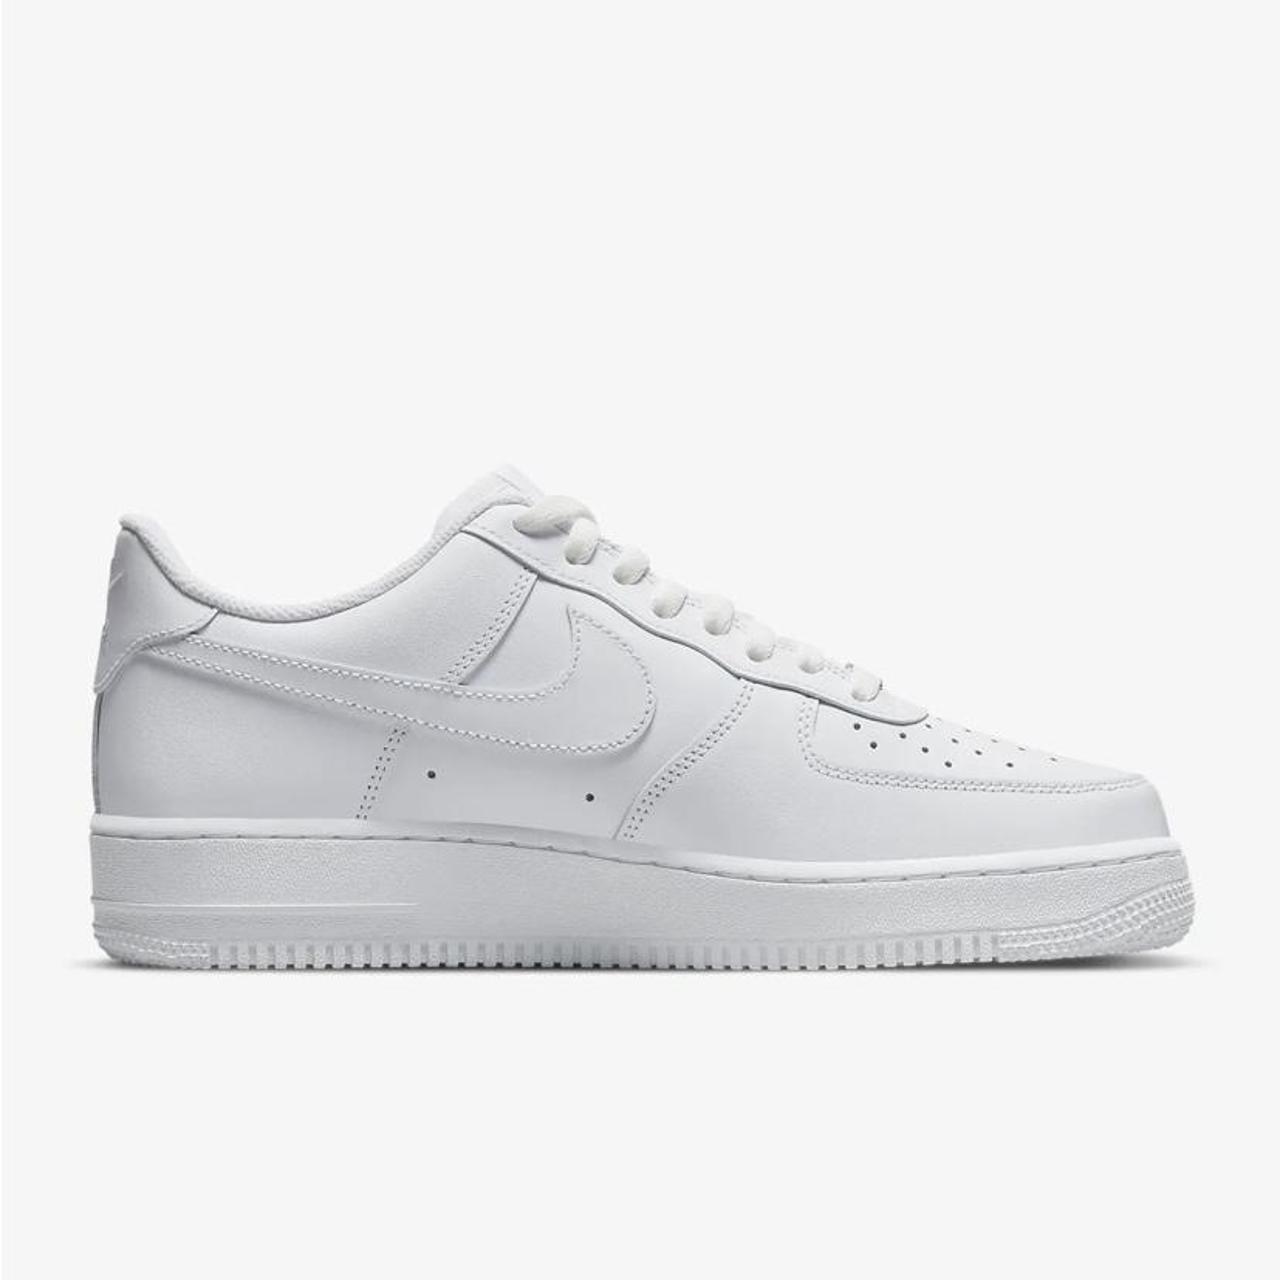 Nike air force 1, new, discounted, brand new - Depop